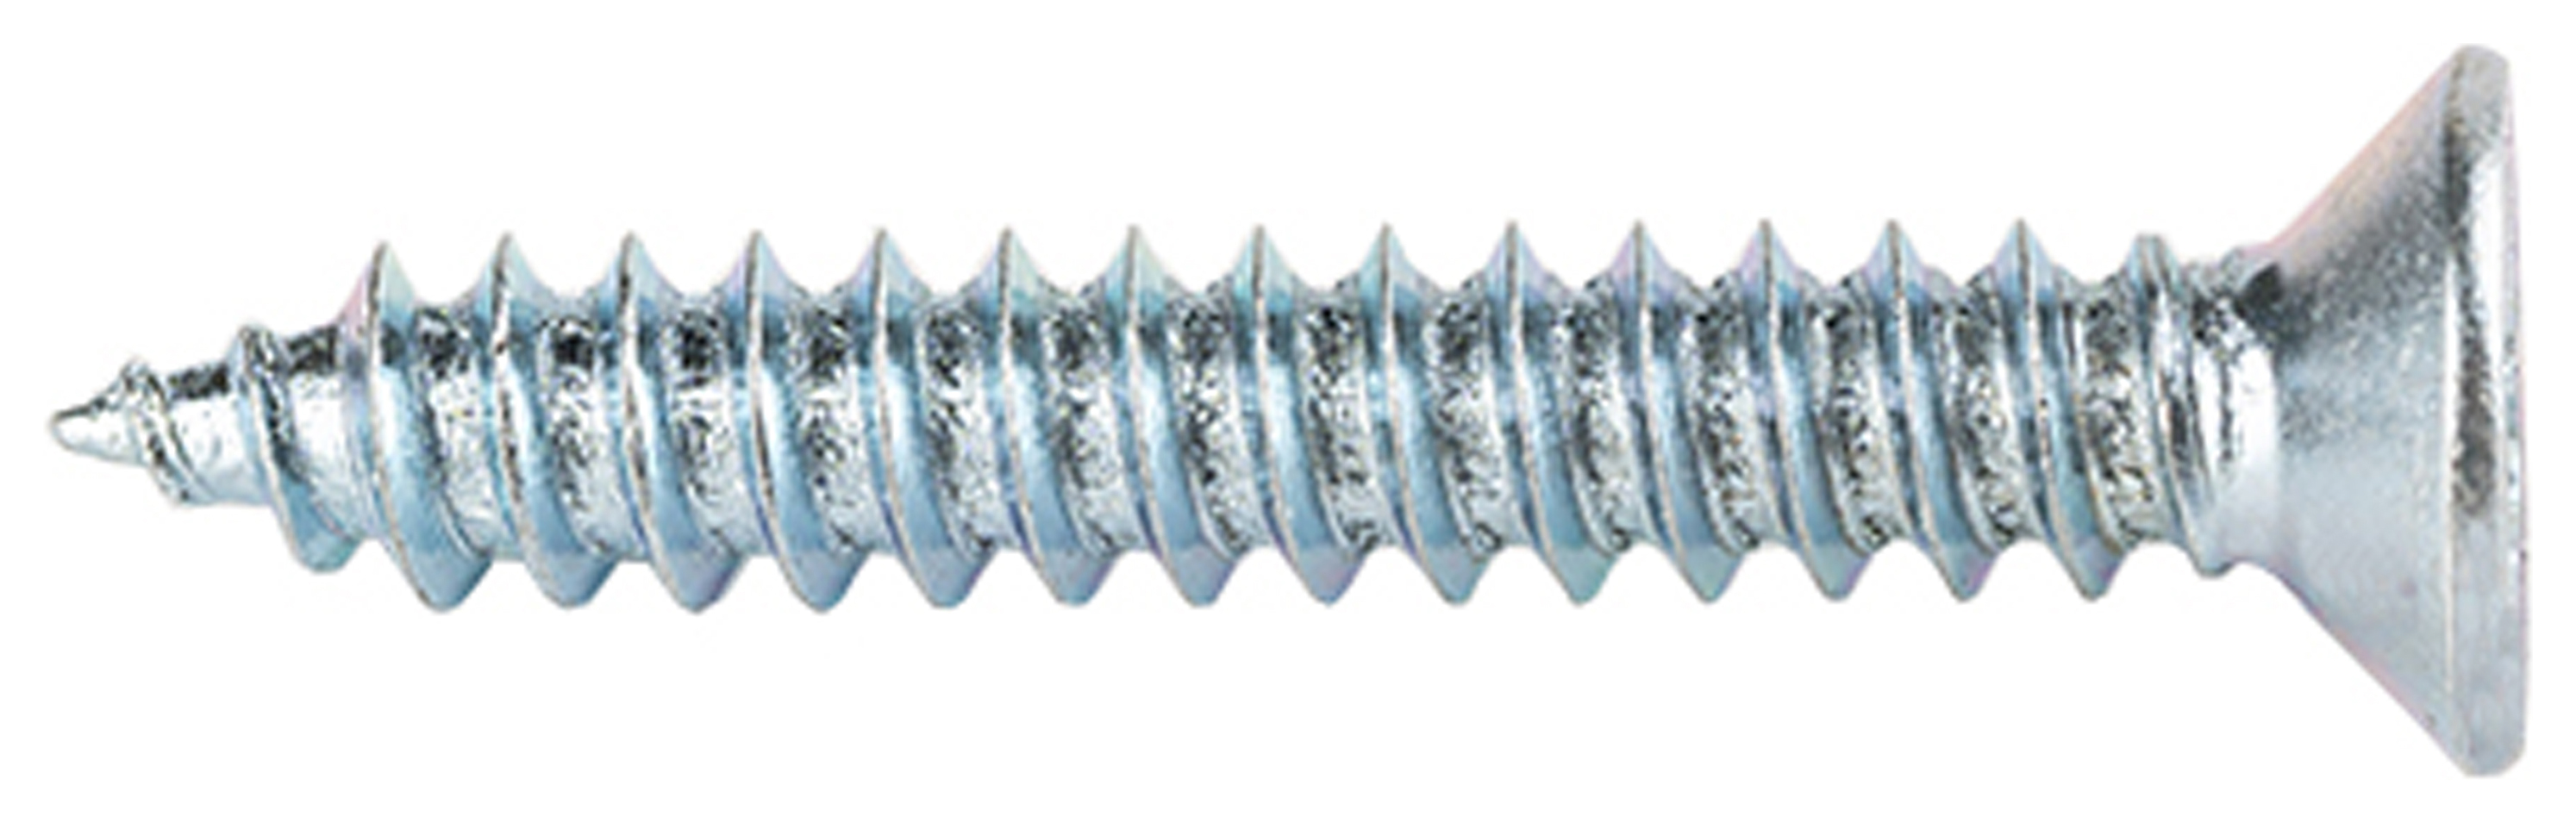 Wickes Self Tapping Countersunk Head Screws - 5 x 30mm - Pack of 100